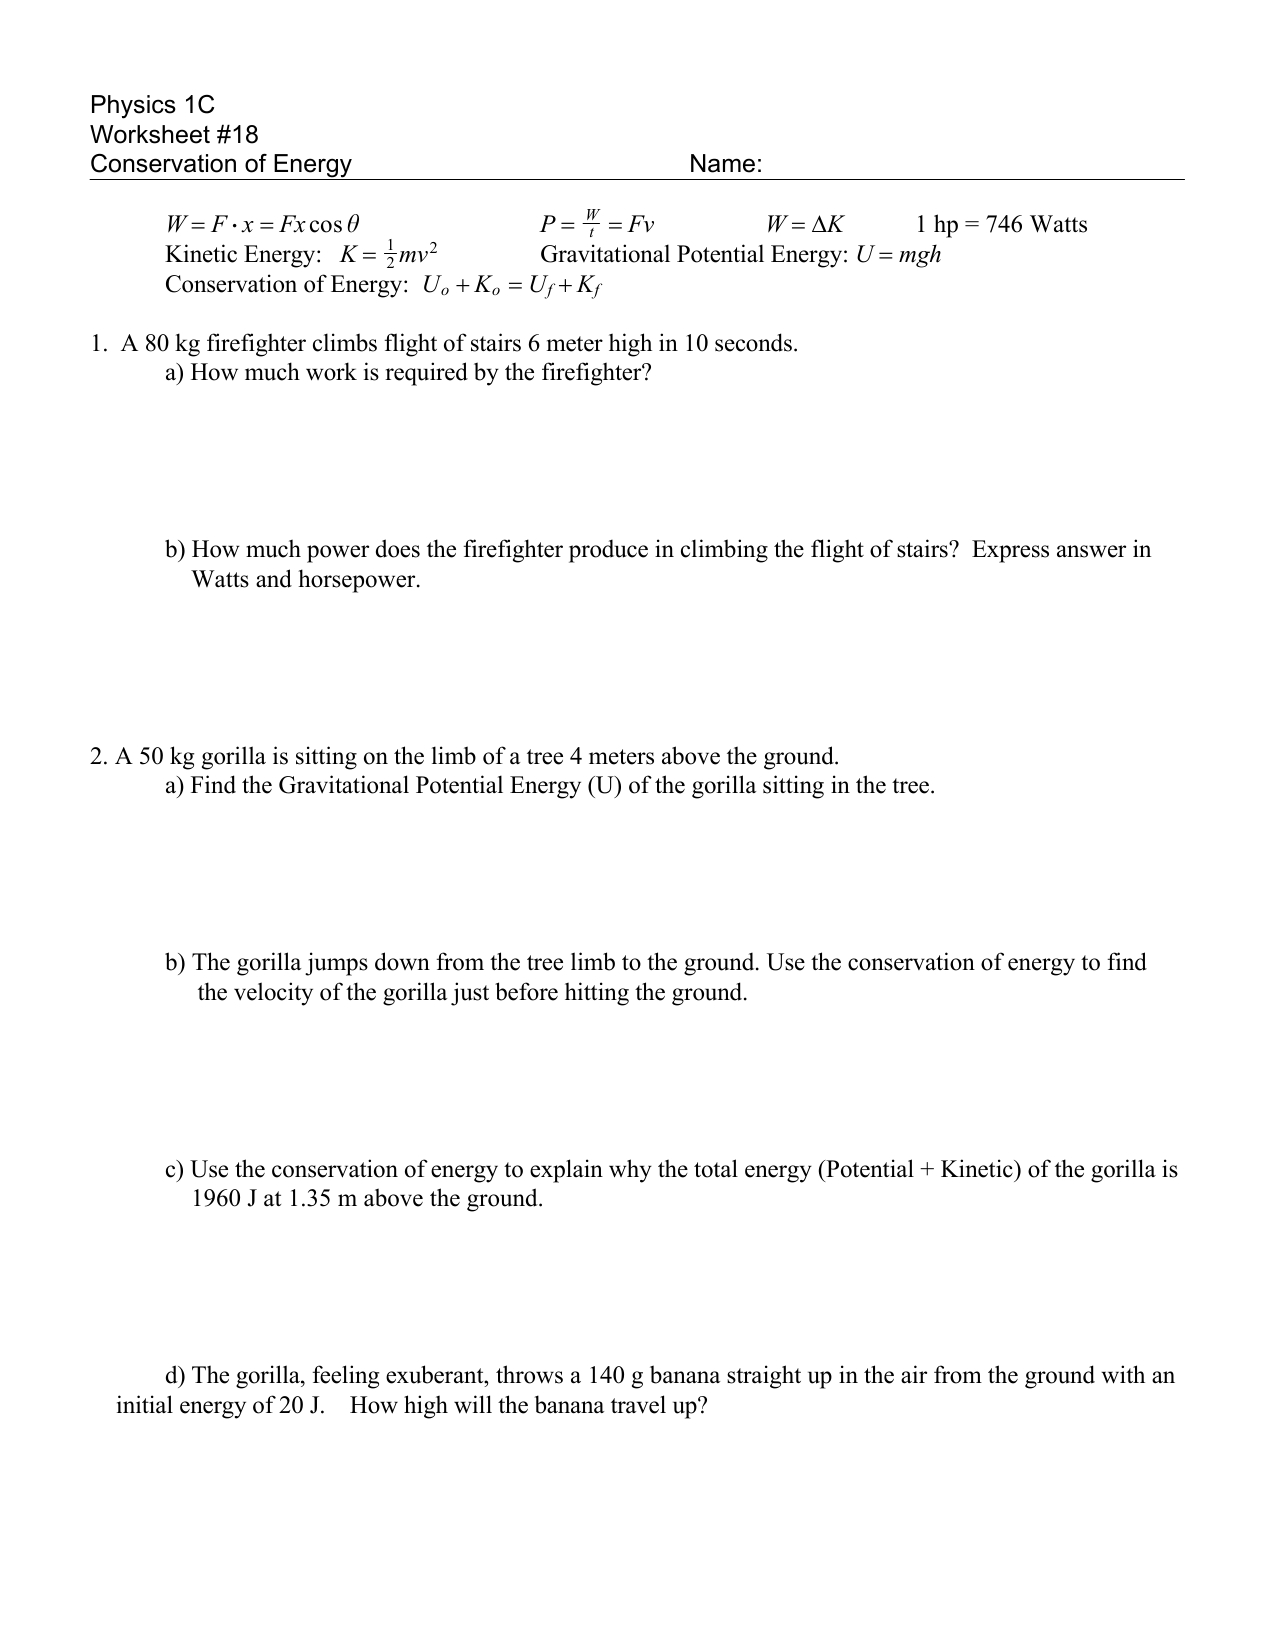 Conservation Of Energy Worksheet With Answers Db excel